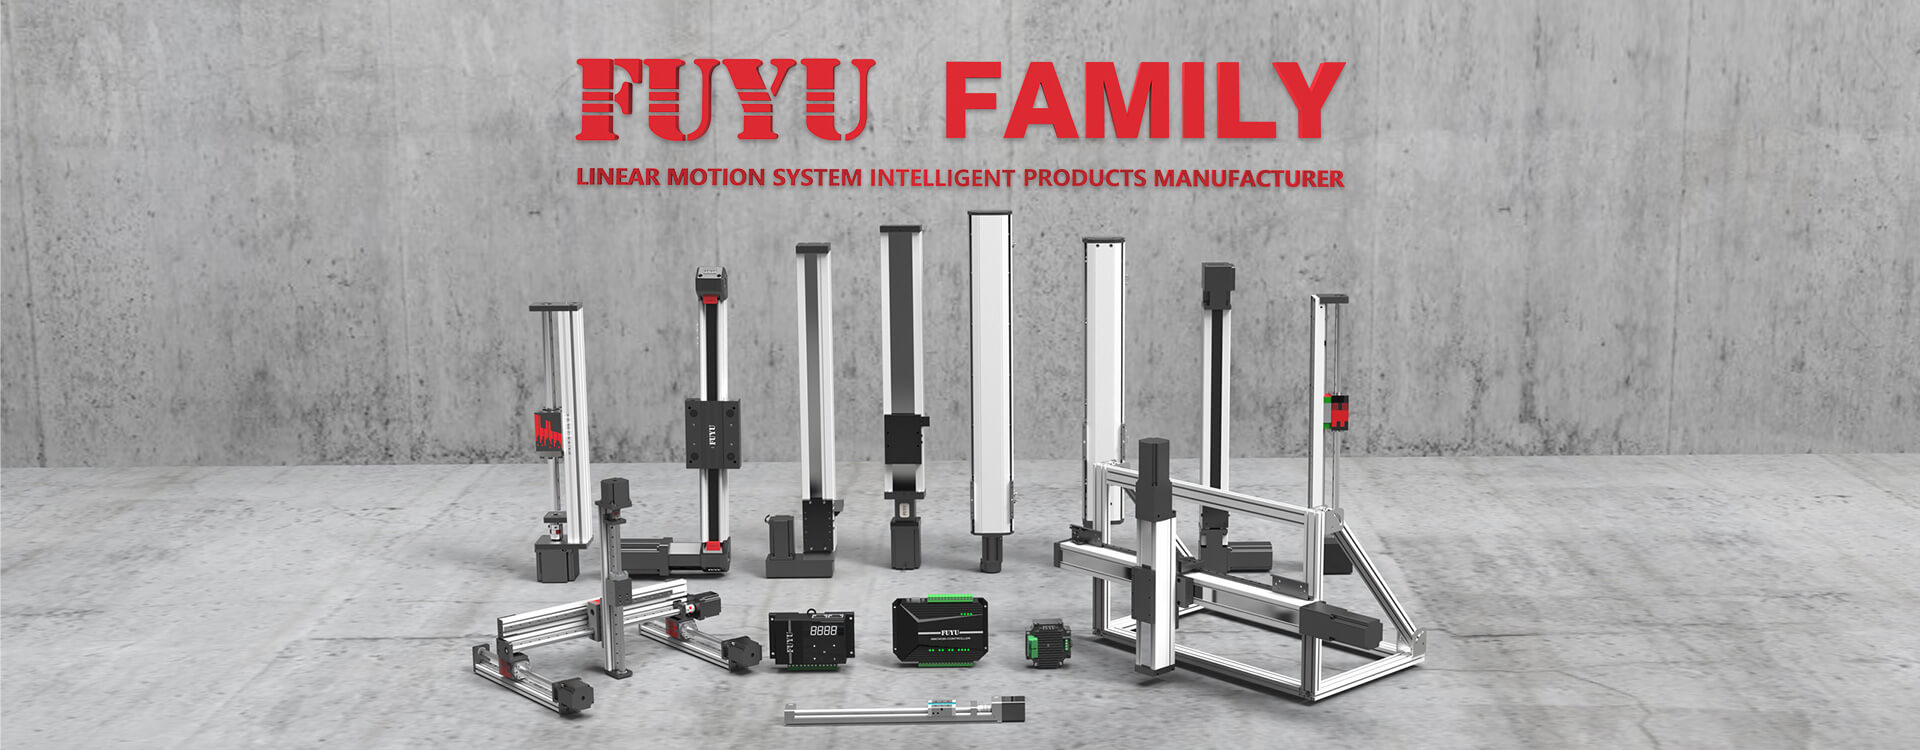 https://cdnus.globalso.com/fuyumotion/linear-positioning-system-for-pick-and-place.jpg